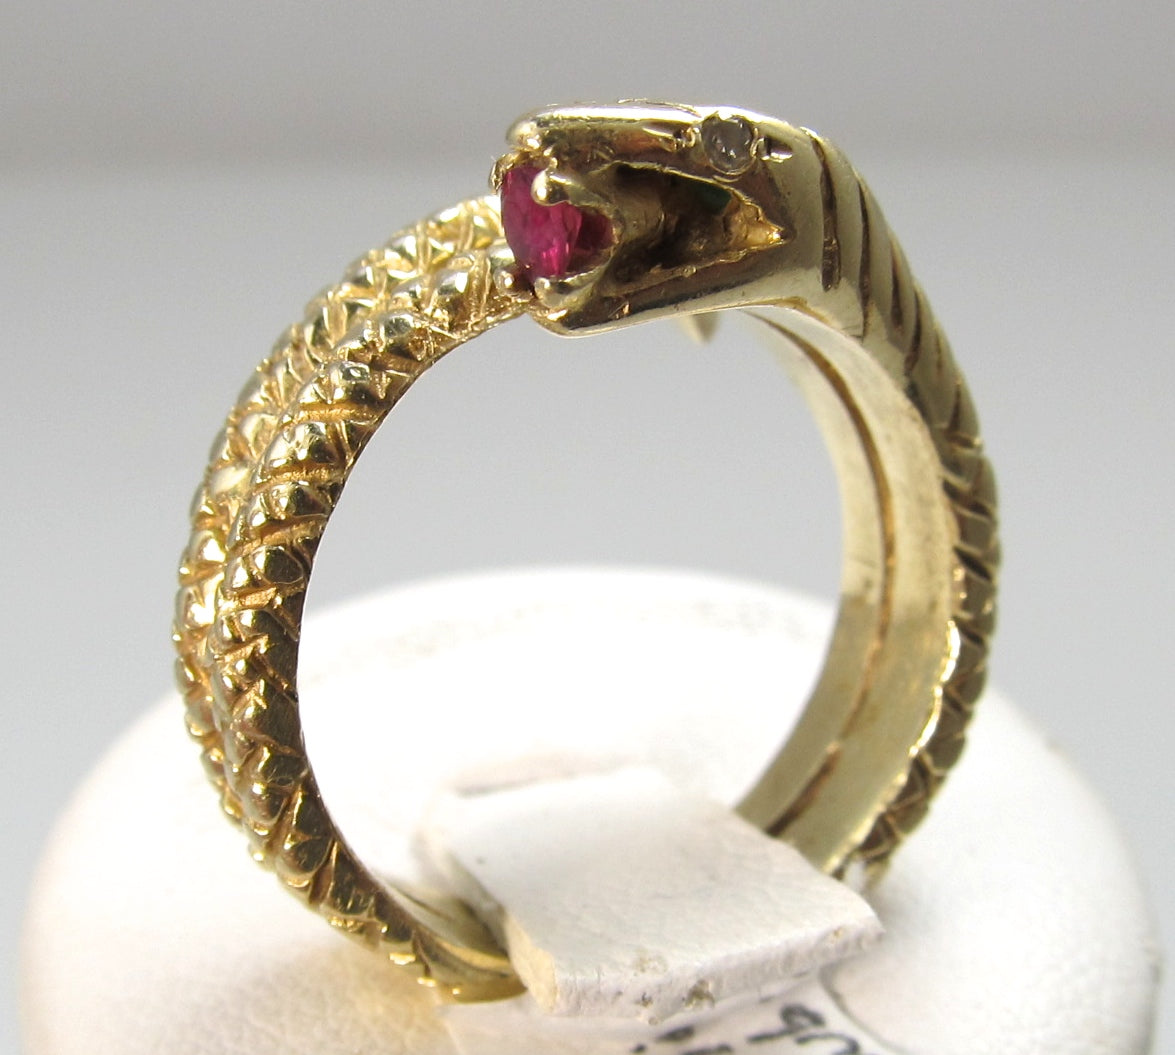 Vintage coiled snake ring, ruby, 14k yellow gold, Victorious Cape May